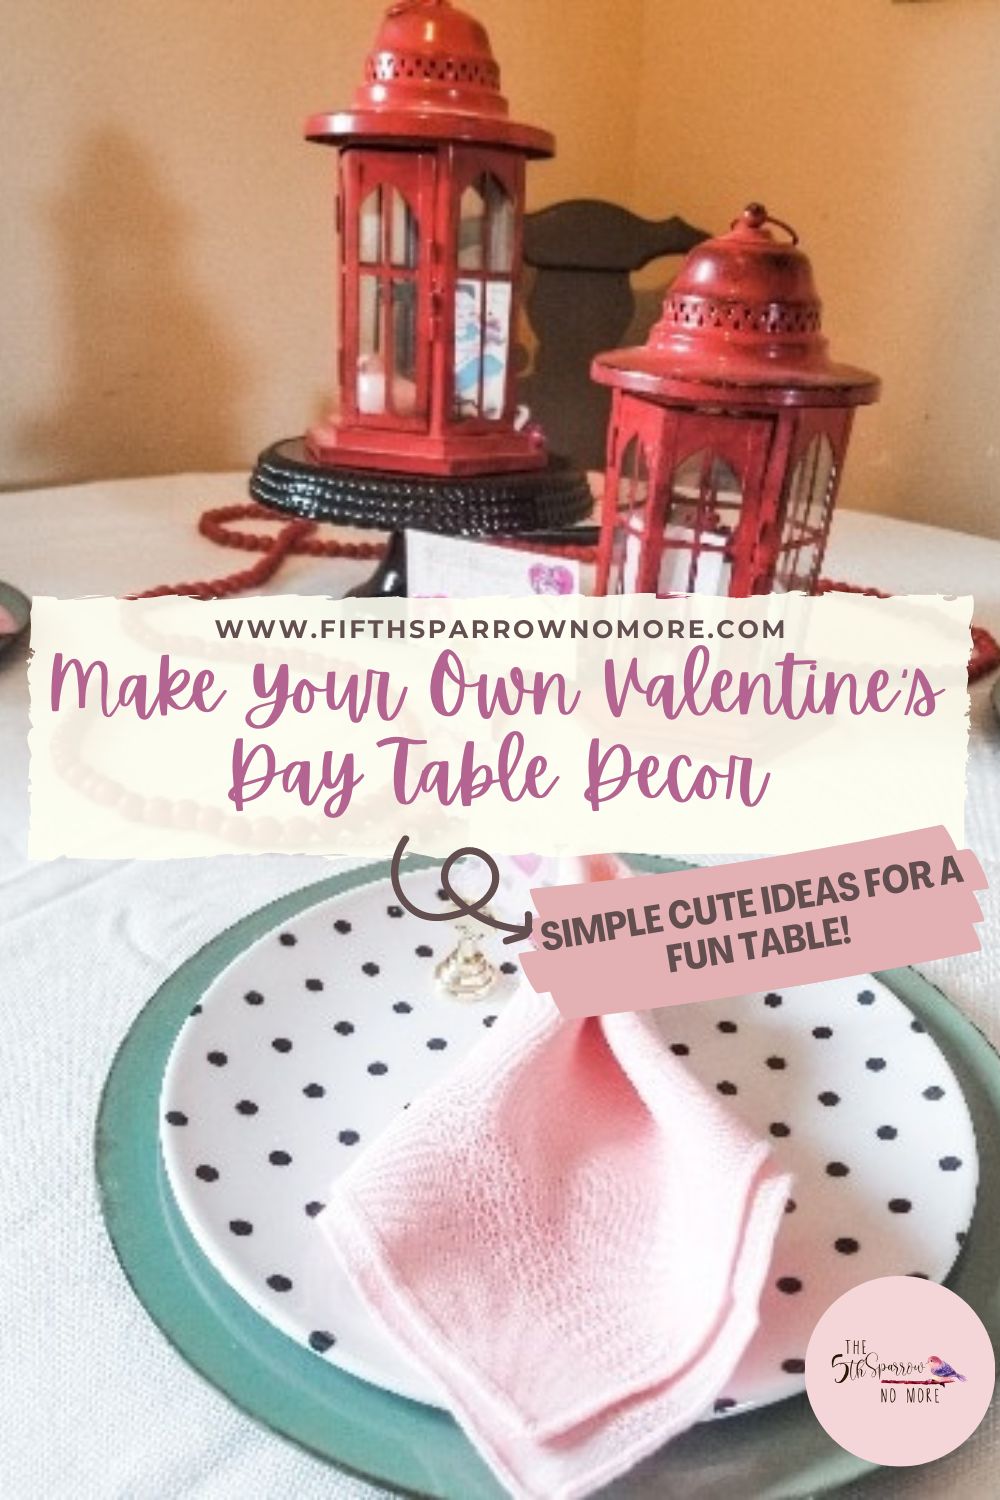 Make easy decorations for a table, plates made with cardboard, dressed up napkin rings and a centerpiece with vintage images and bead garland.